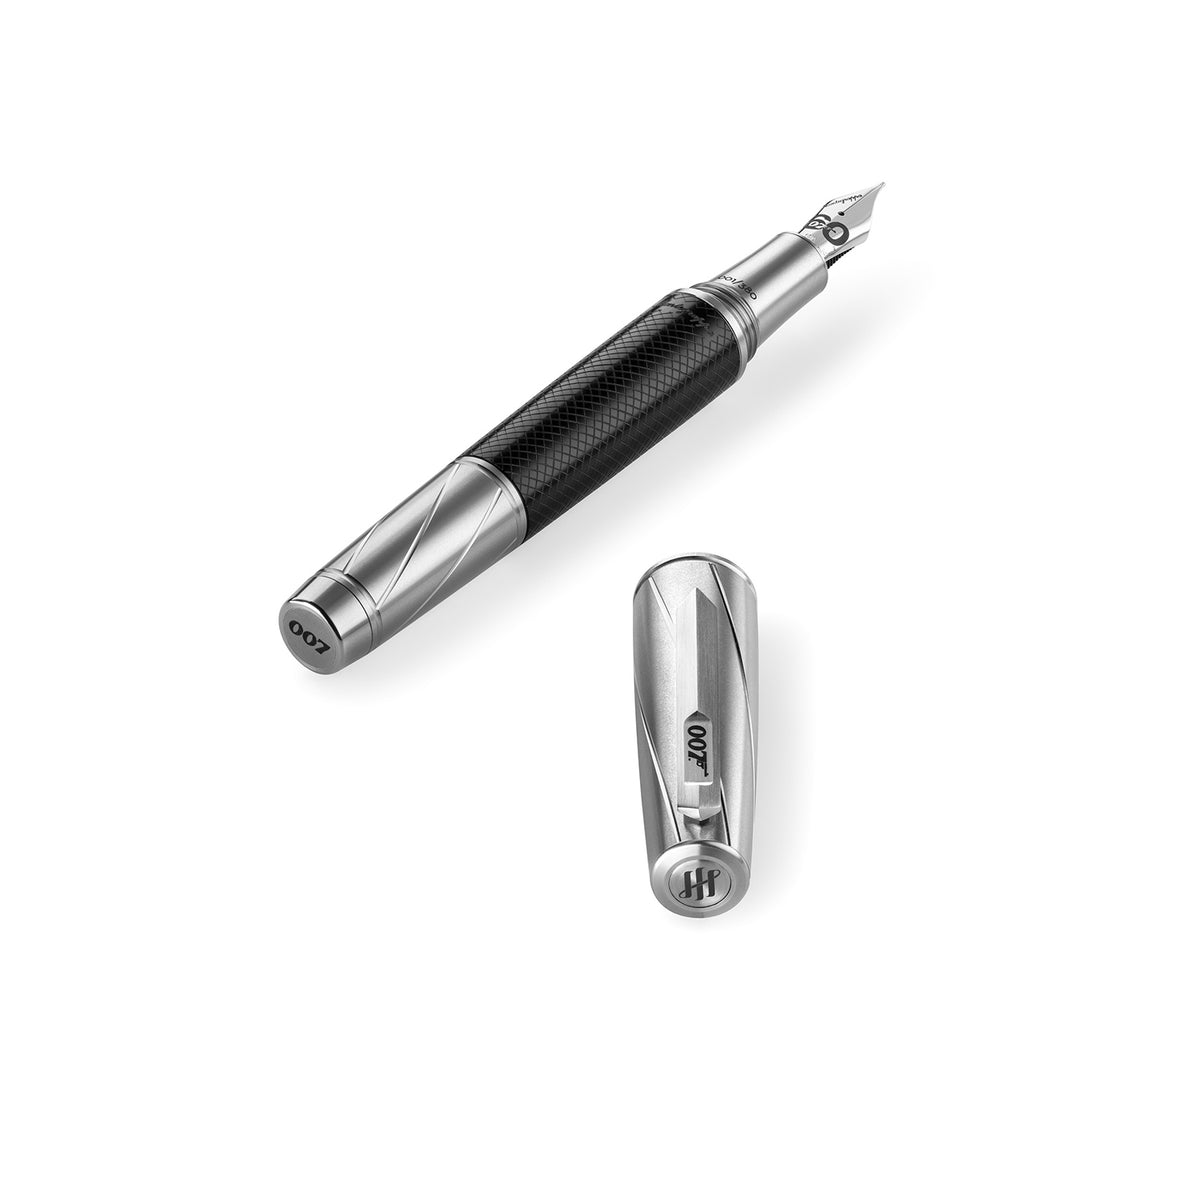 James Bond 007 Spymaster Duo Fountain Pen - Numbered Edition - By Montegrappa